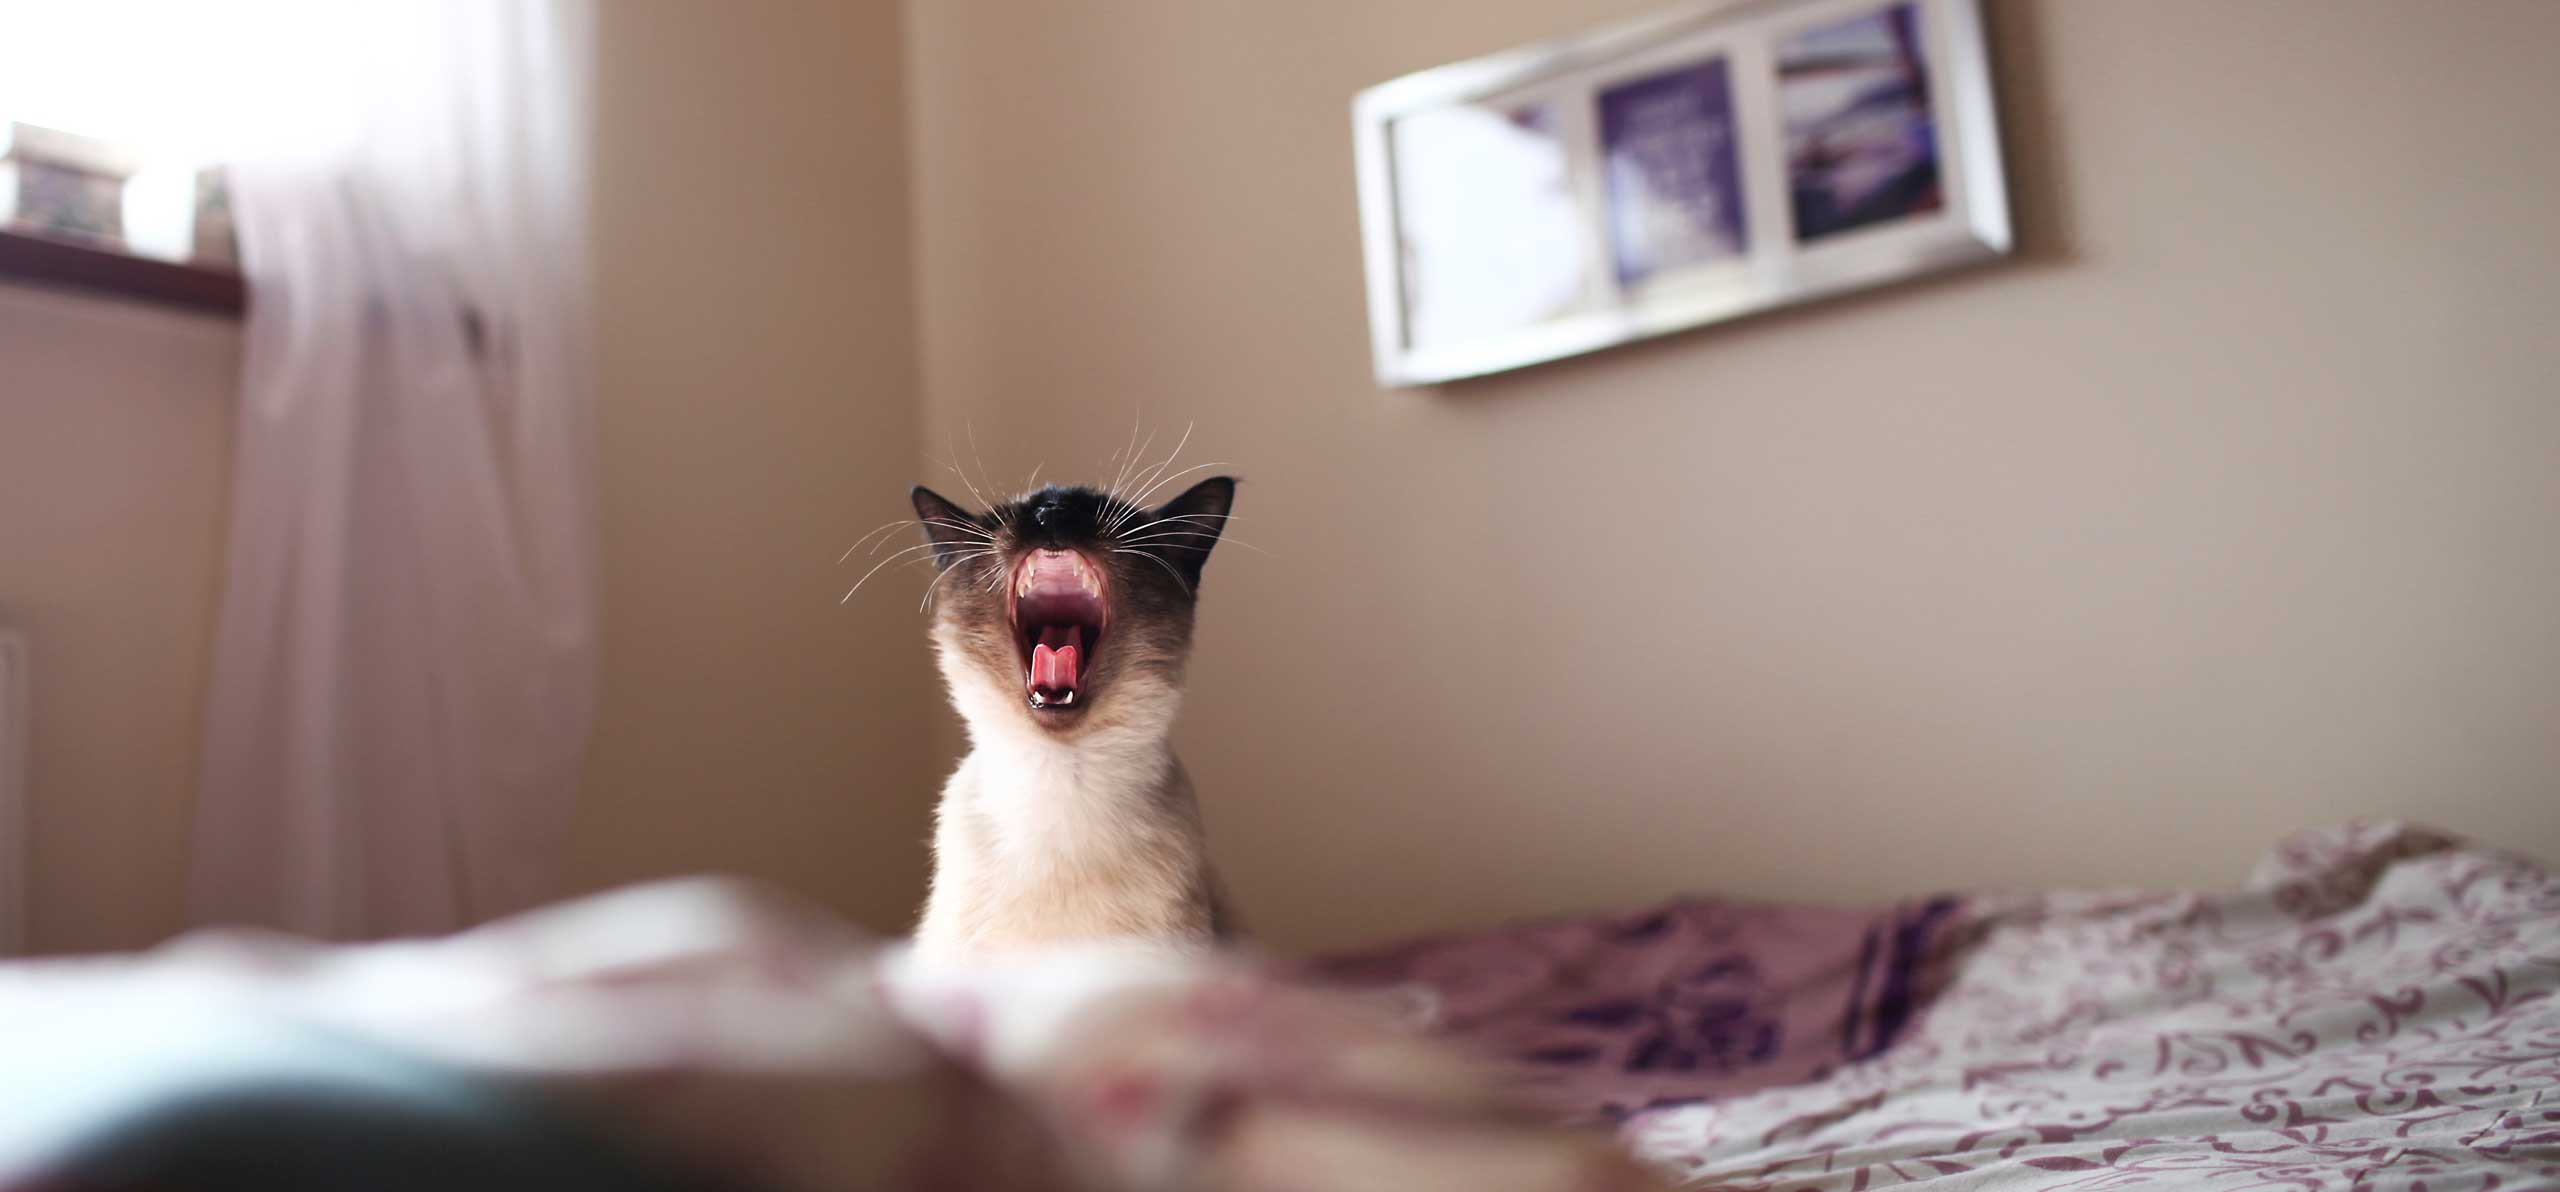 cat yawning on a bed